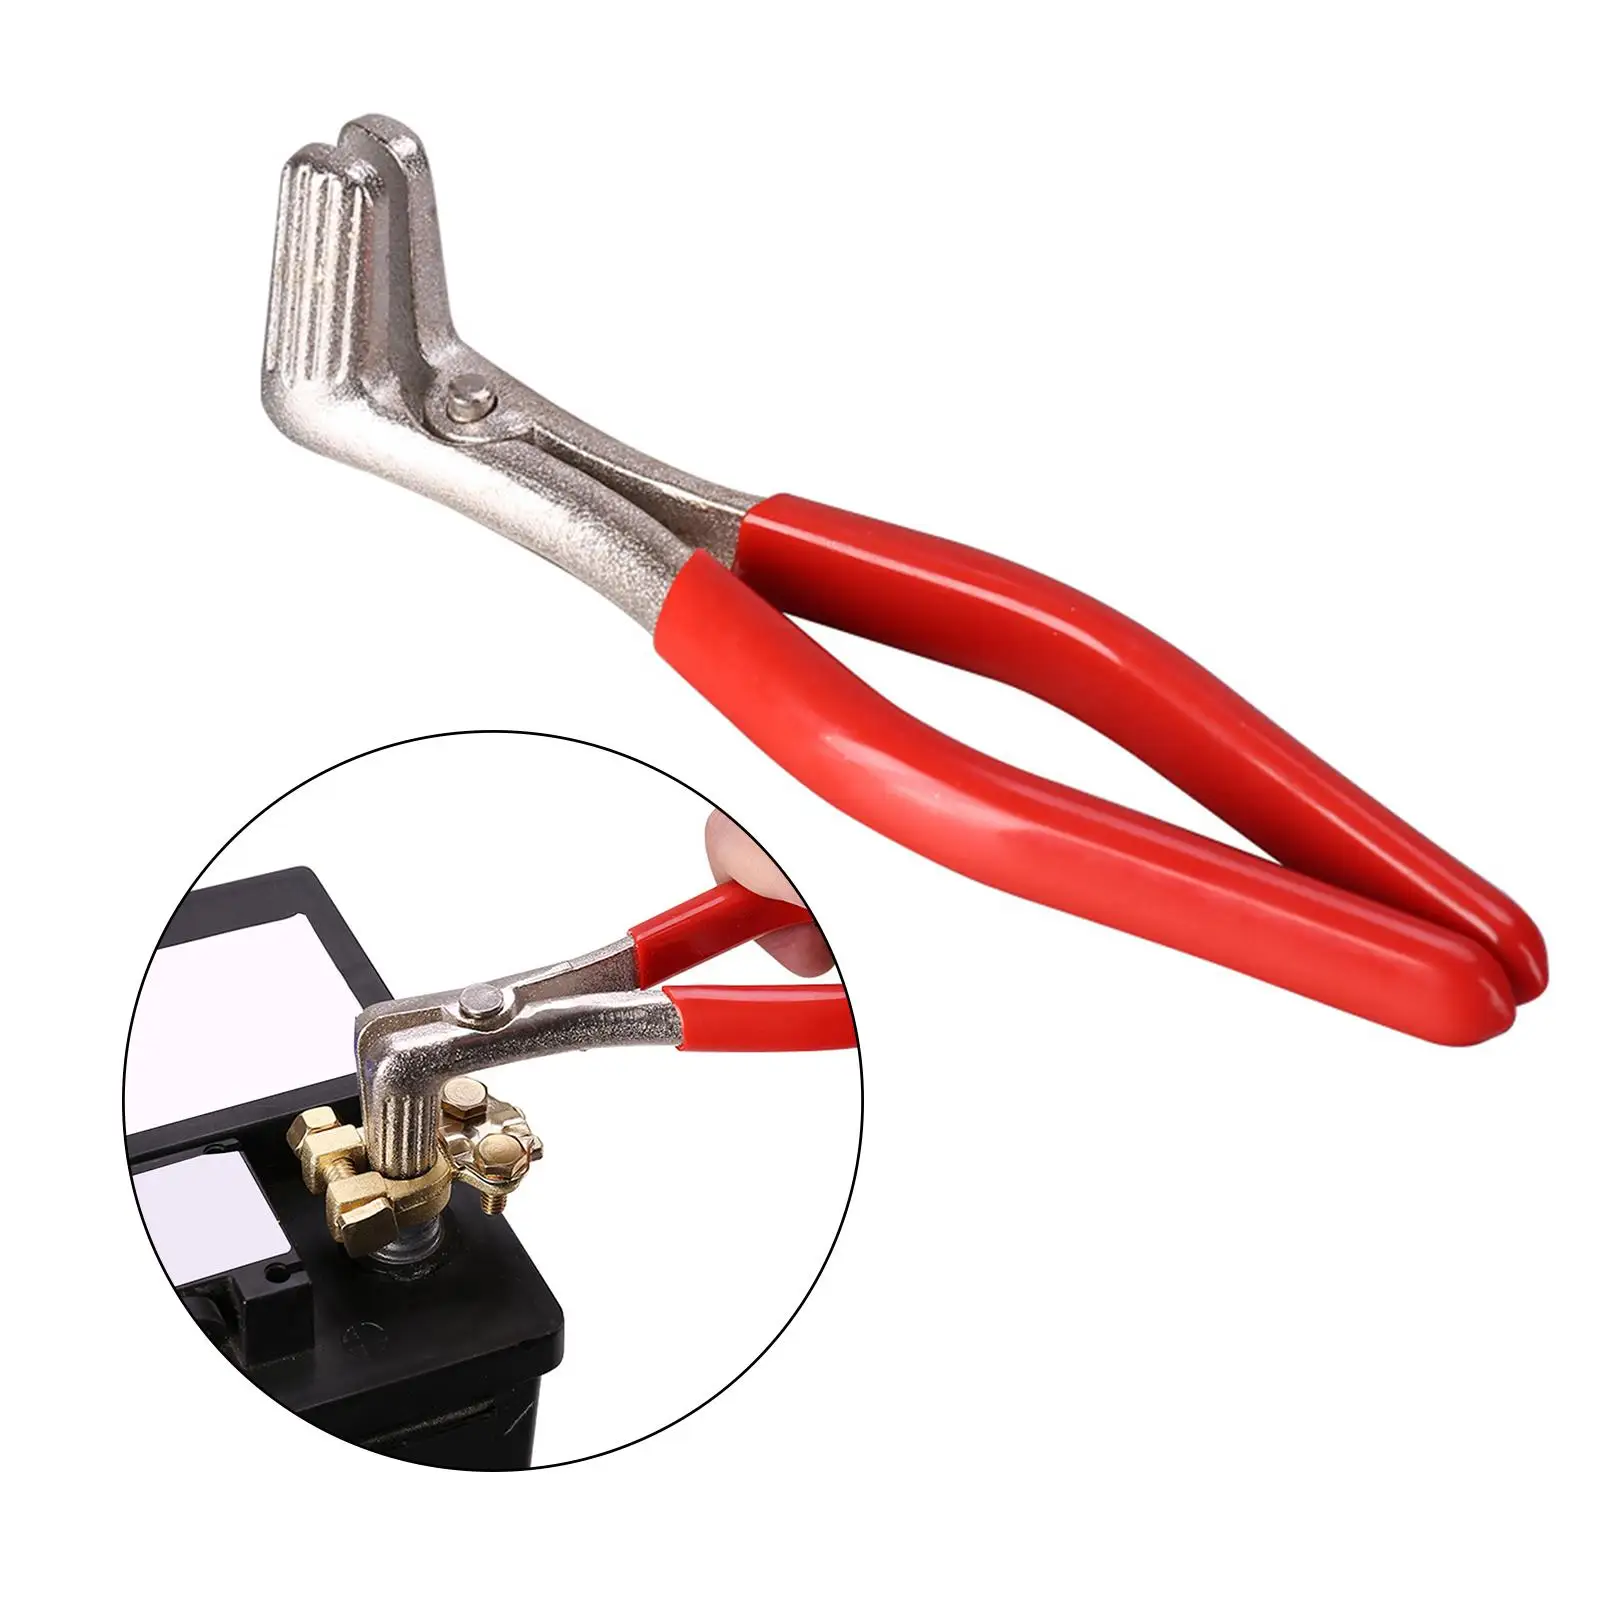 Car Battery Terminal Pliers Automotive Repair Tool Portable Hand Tools Easy to Carry Professional Spreader Pliers for Fittings